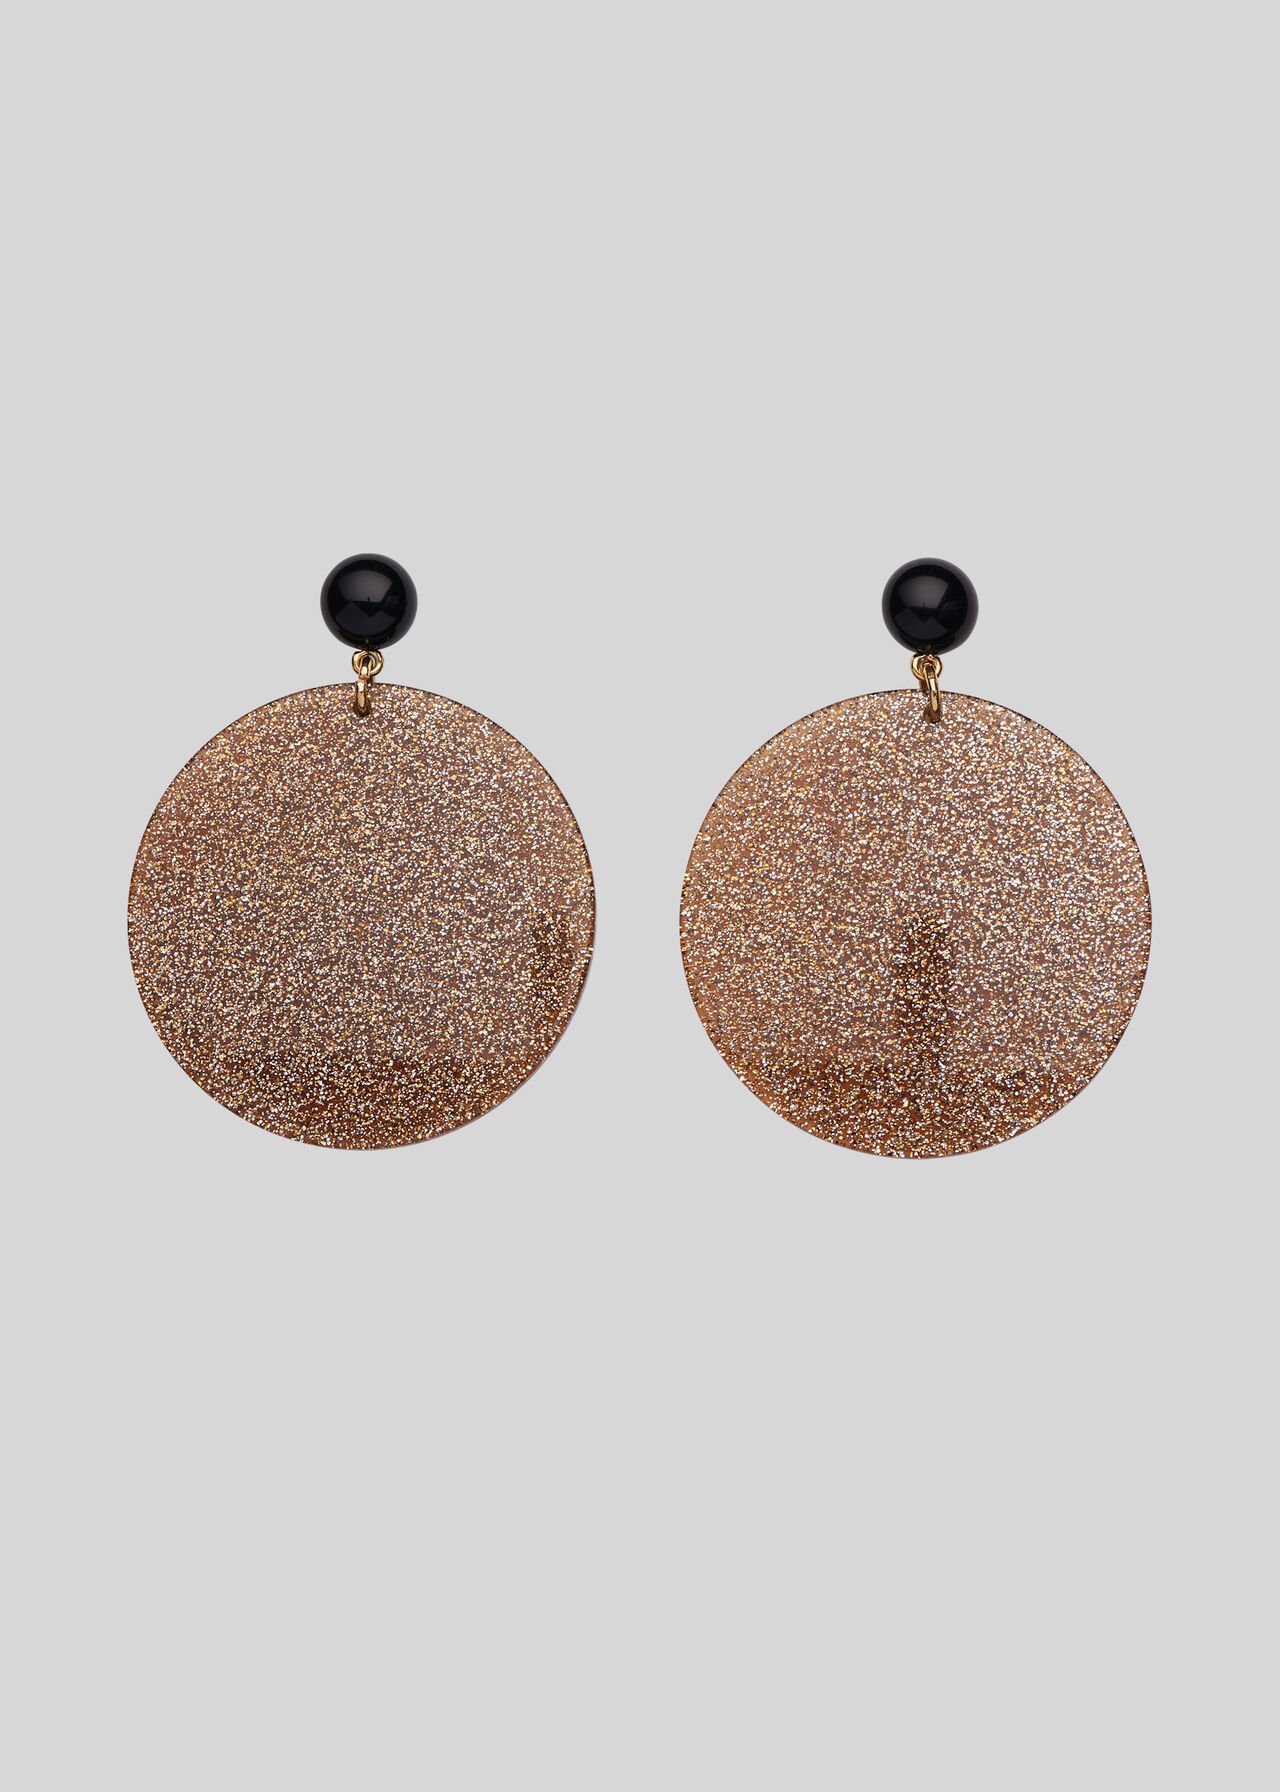 Glitter and sparkle with modern look. Modern resin earrings